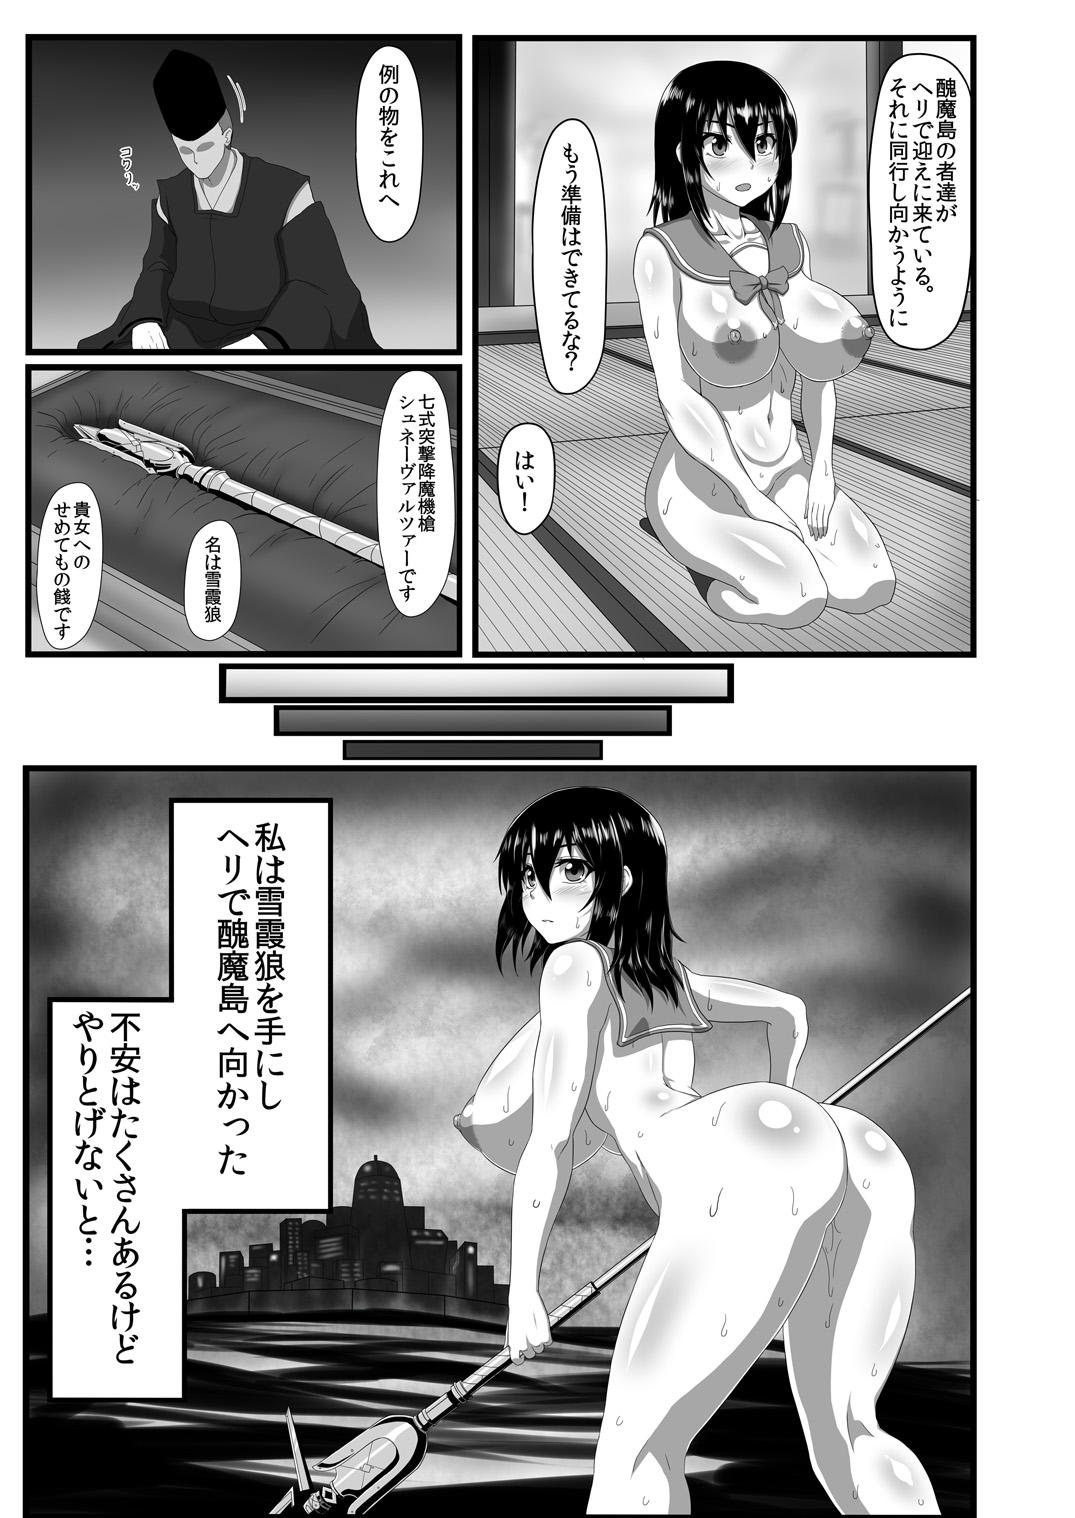 Facial Slave the Blood - Strike the blood Online - Page 10